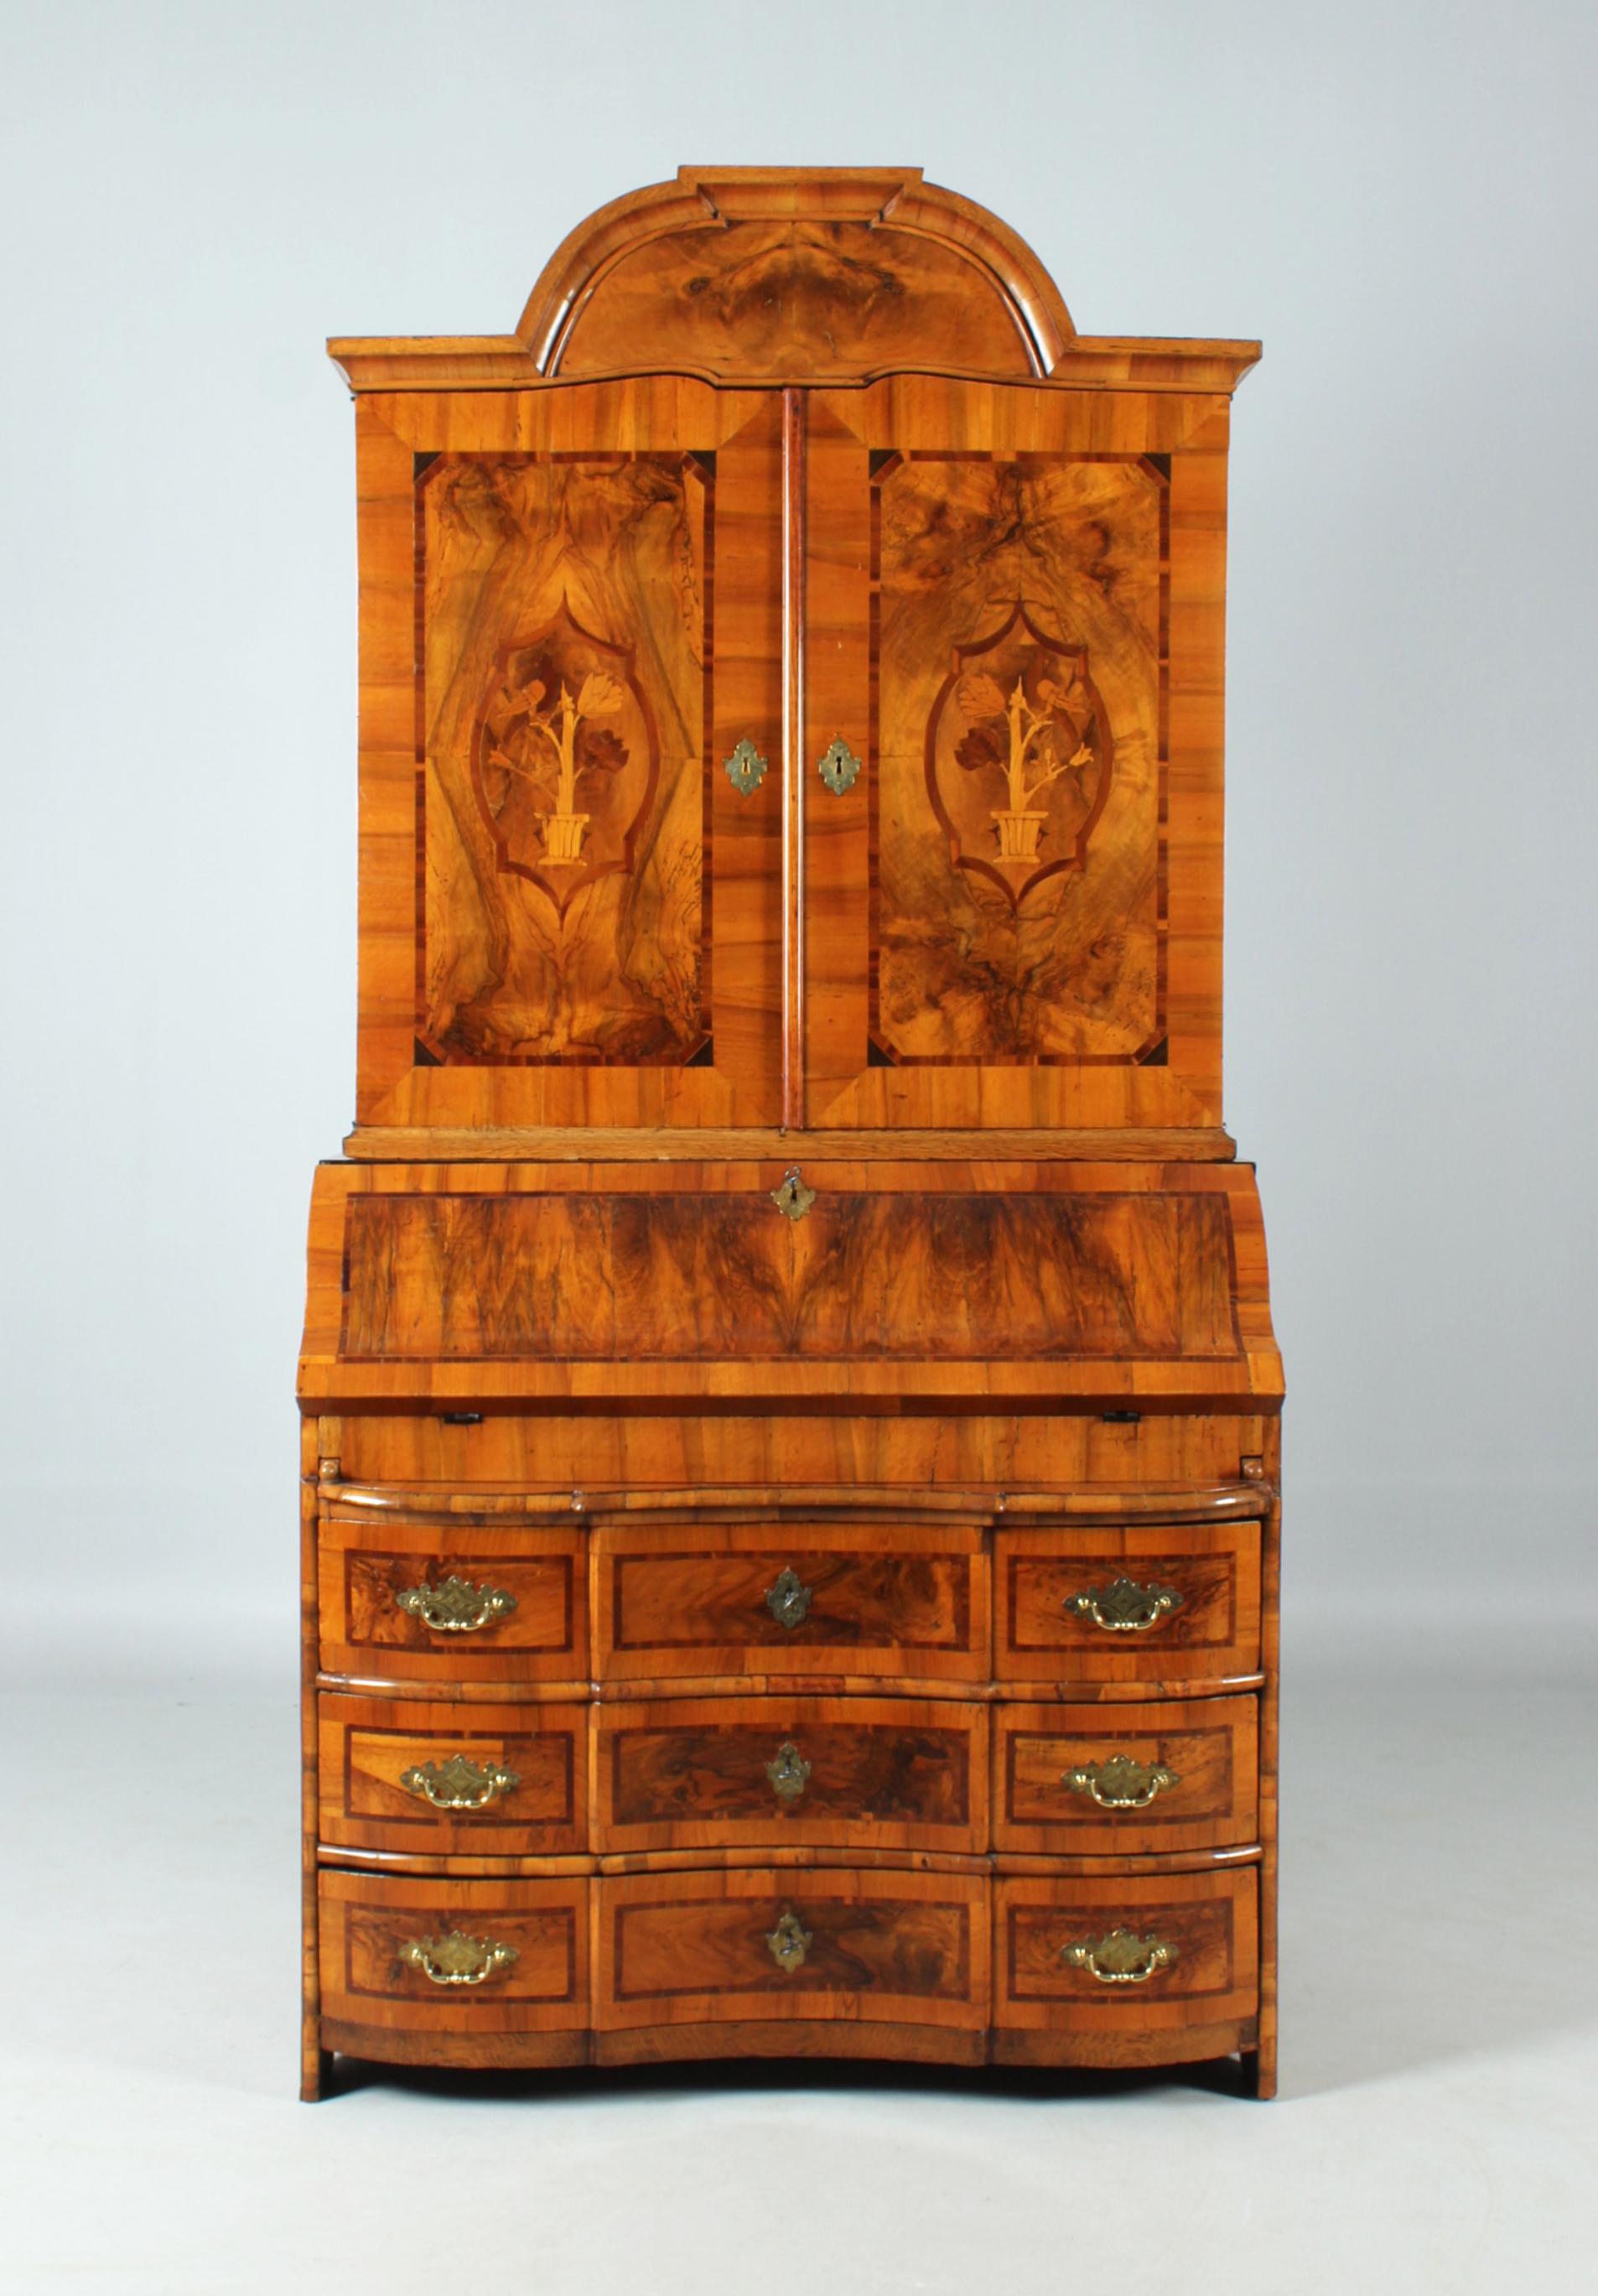 Dimensions: H x W x D: 233 x 117 x 69 cm

Description:
Two-piece top secretary from the Baroque period circa 1750.

The three-bay base is curved in the front, the discreetly accentuated crosspieces and the top edge are made of walnut end-grain